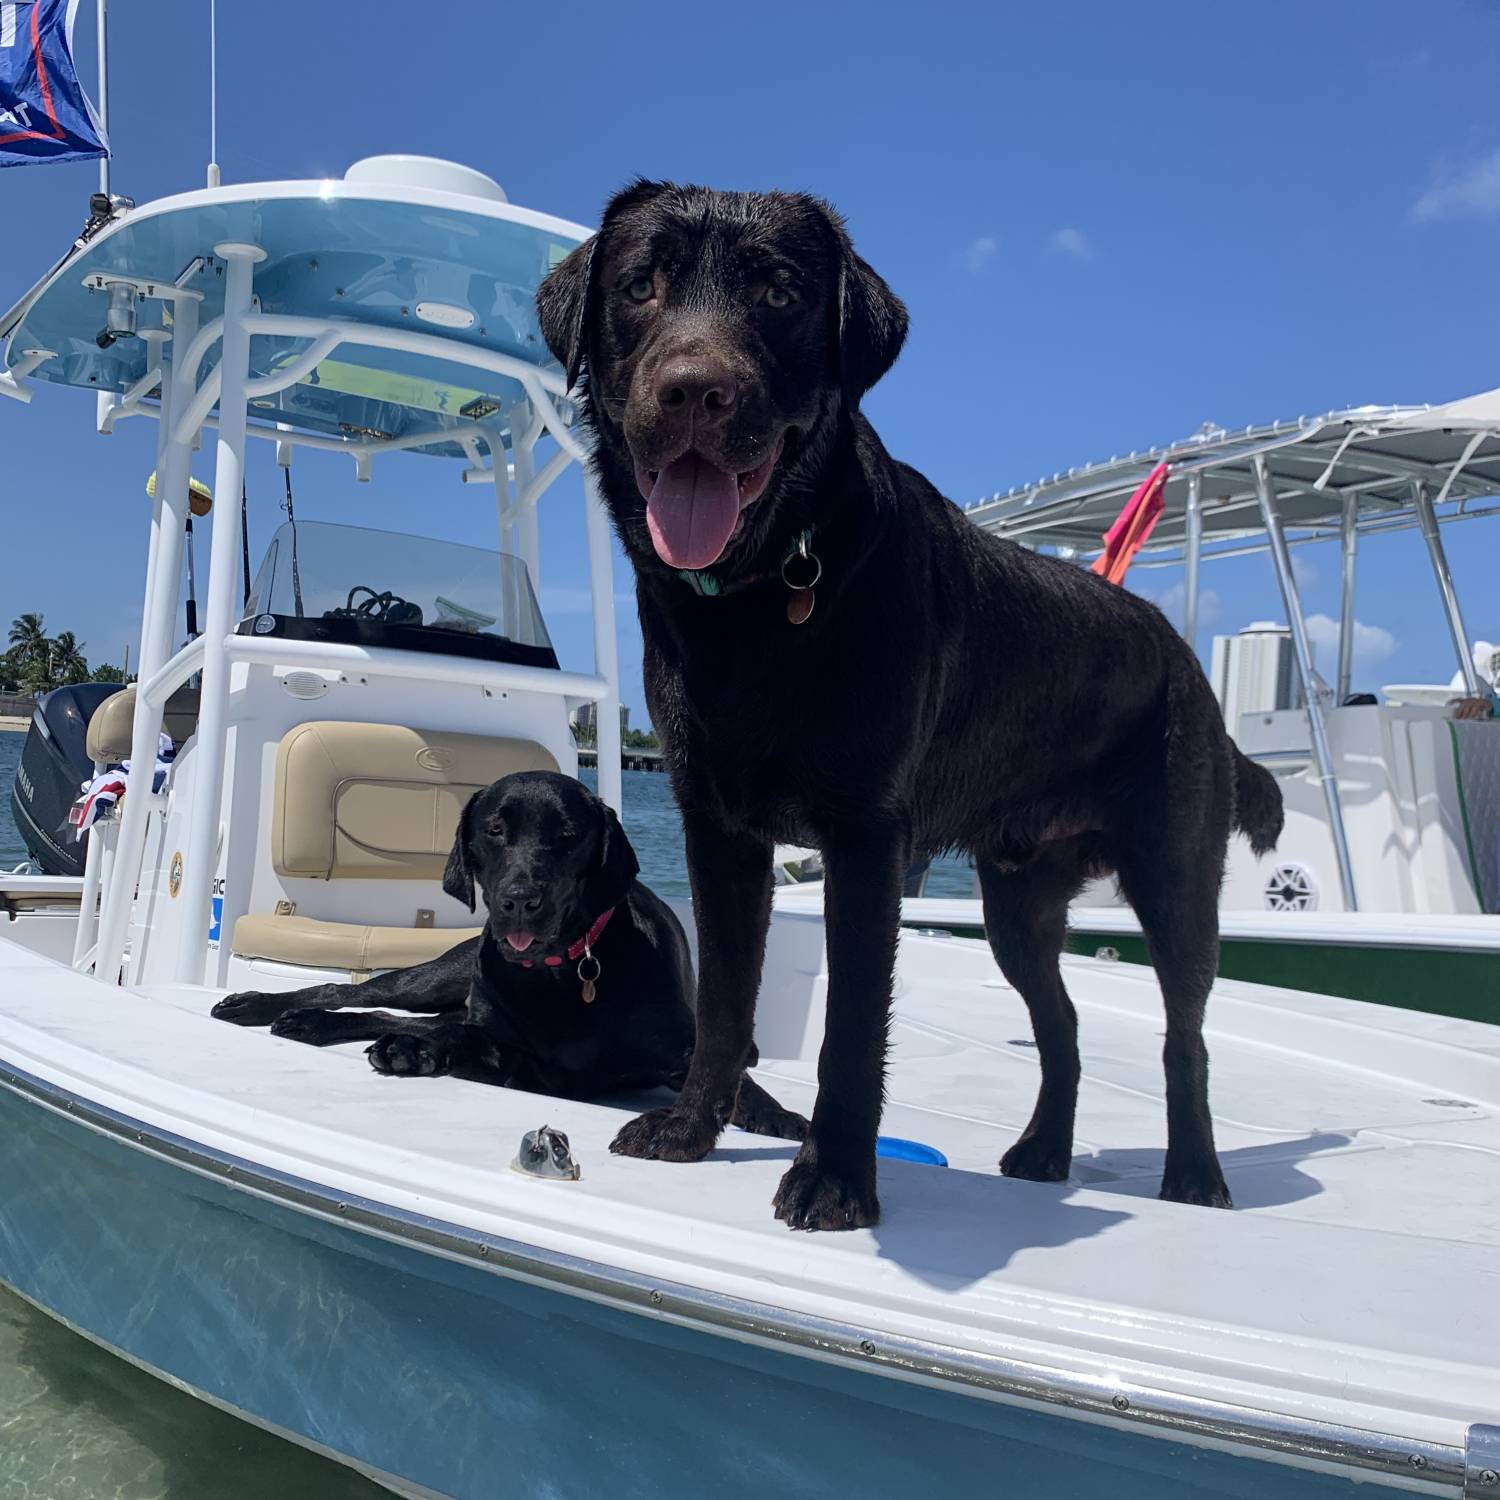 Title: Labrador approved :) - On board their Sportsman Masters 247 Bay Boat - Location: Palm Beach, Florida. Participating in the Photo Contest #SportsmanJuly